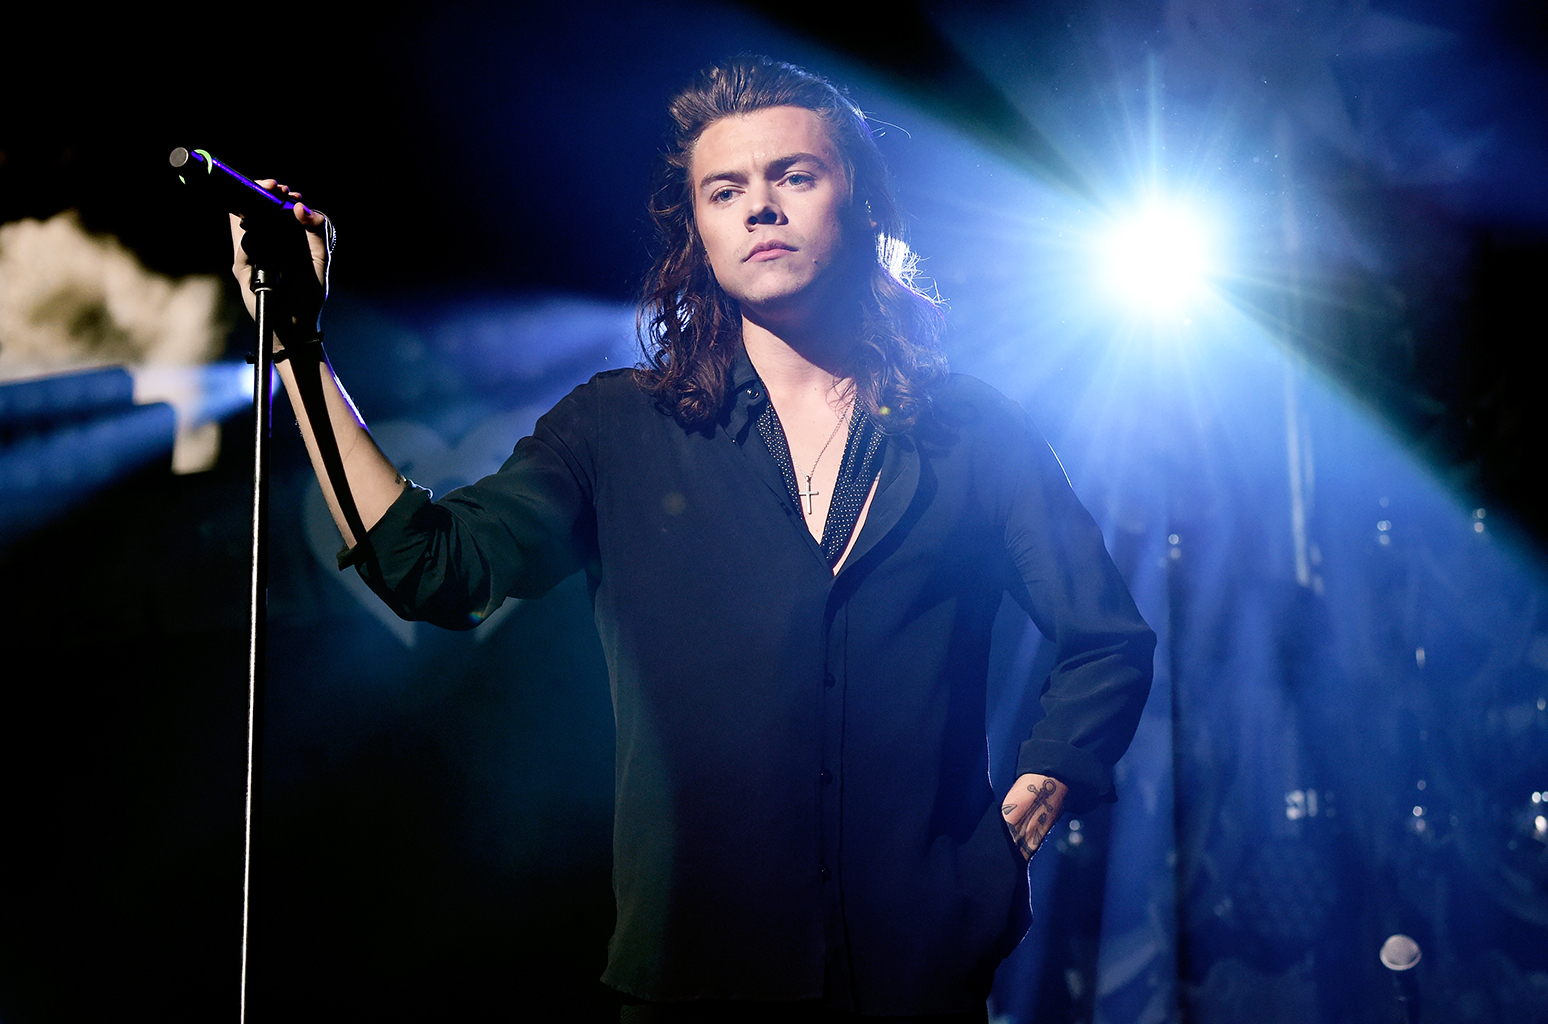 DALLAS, TX - DECEMBER 01:  Singer Harry Styles of musical group One Direction performs onstage during 106.1 KISS FM's Jingle Ball 2015 presented by Capital One at American Airlines Center on December 1, 2015 in Dallas, Texas.  (Photo by Kevin Mazur/Getty Images for iHeartMedia)